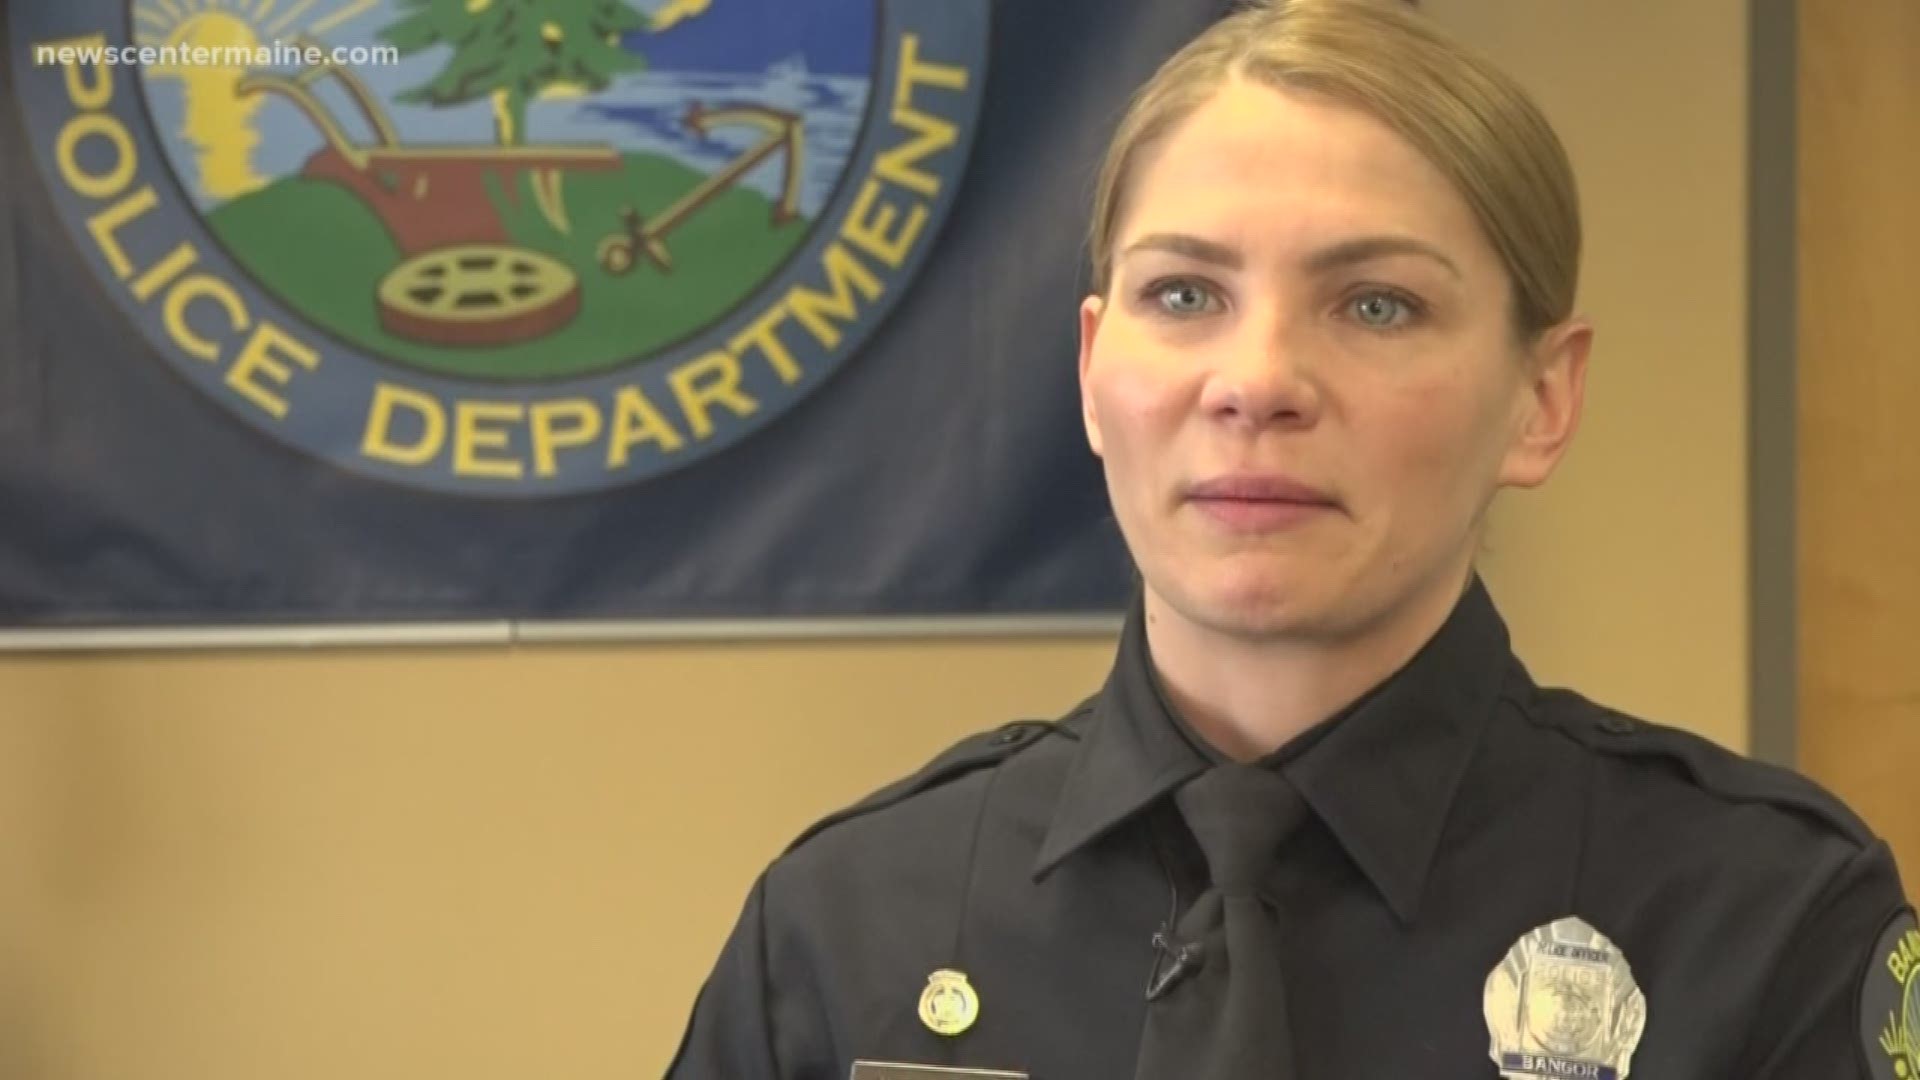 At full staff -- the Bangor Police Department has 84 officers. Gurecki brings the number of *female* officers in the department to 7. Two more women are coming Bangor's way fresh from the Maine Criminal Justice Academy class just under way.